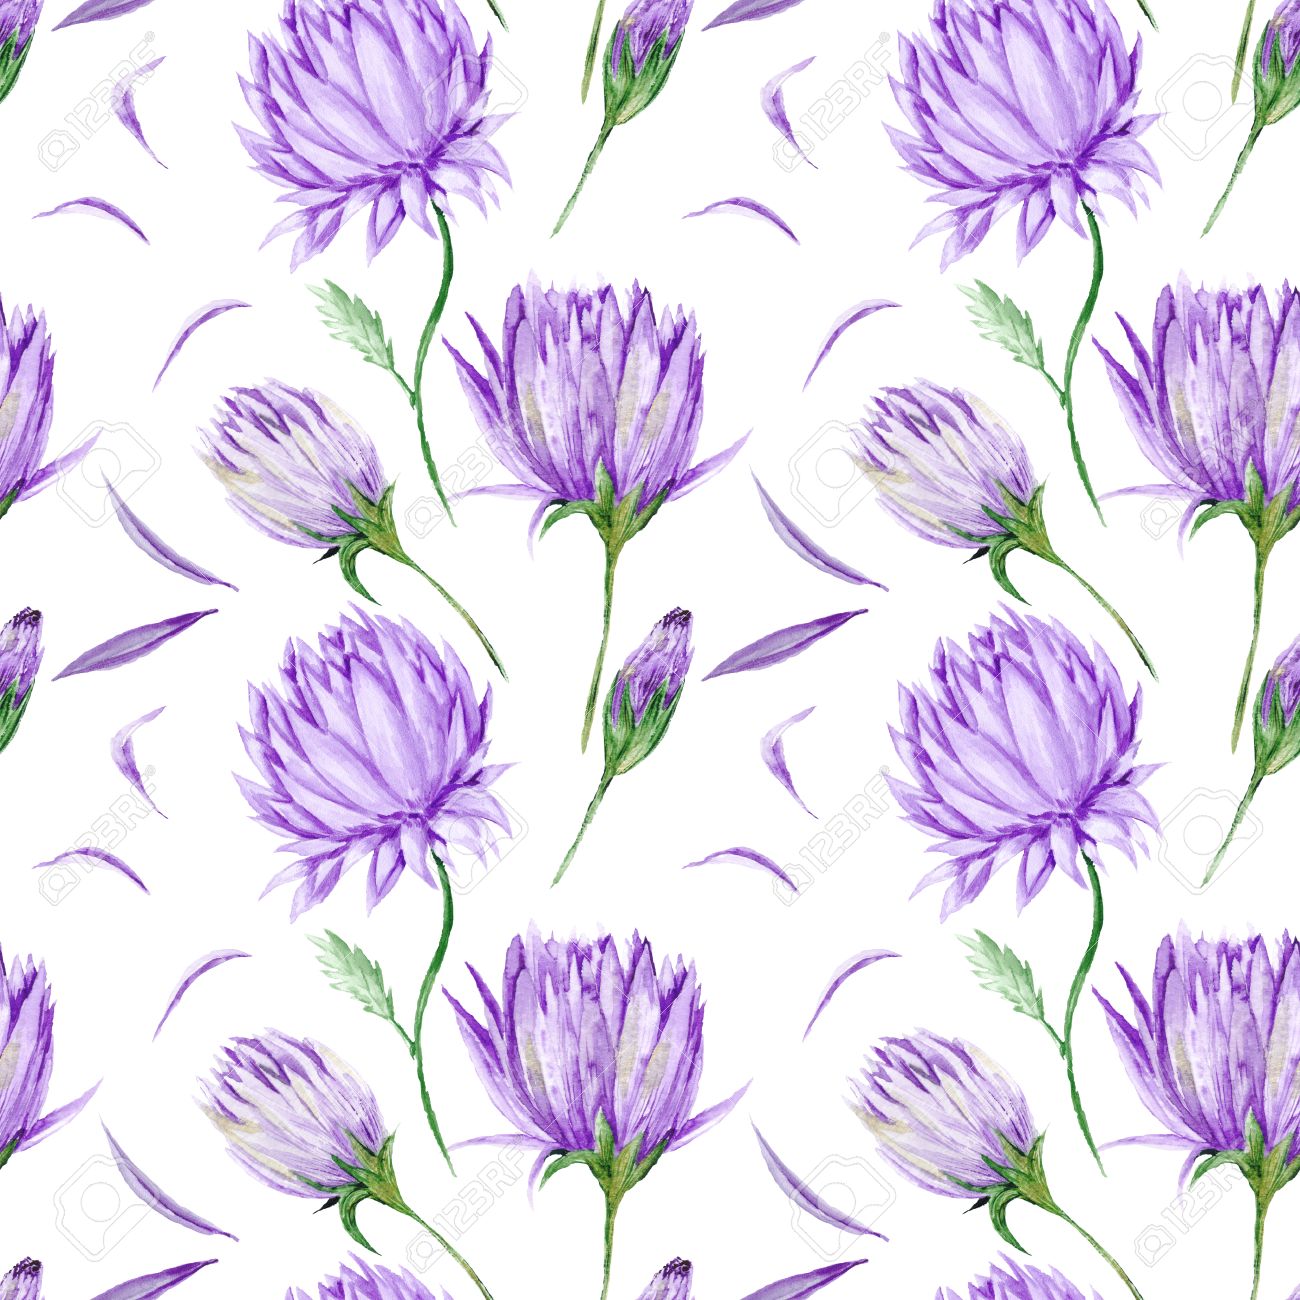 Art Creative Watercolor Wallpaper With Hand Painted Purple Flowers